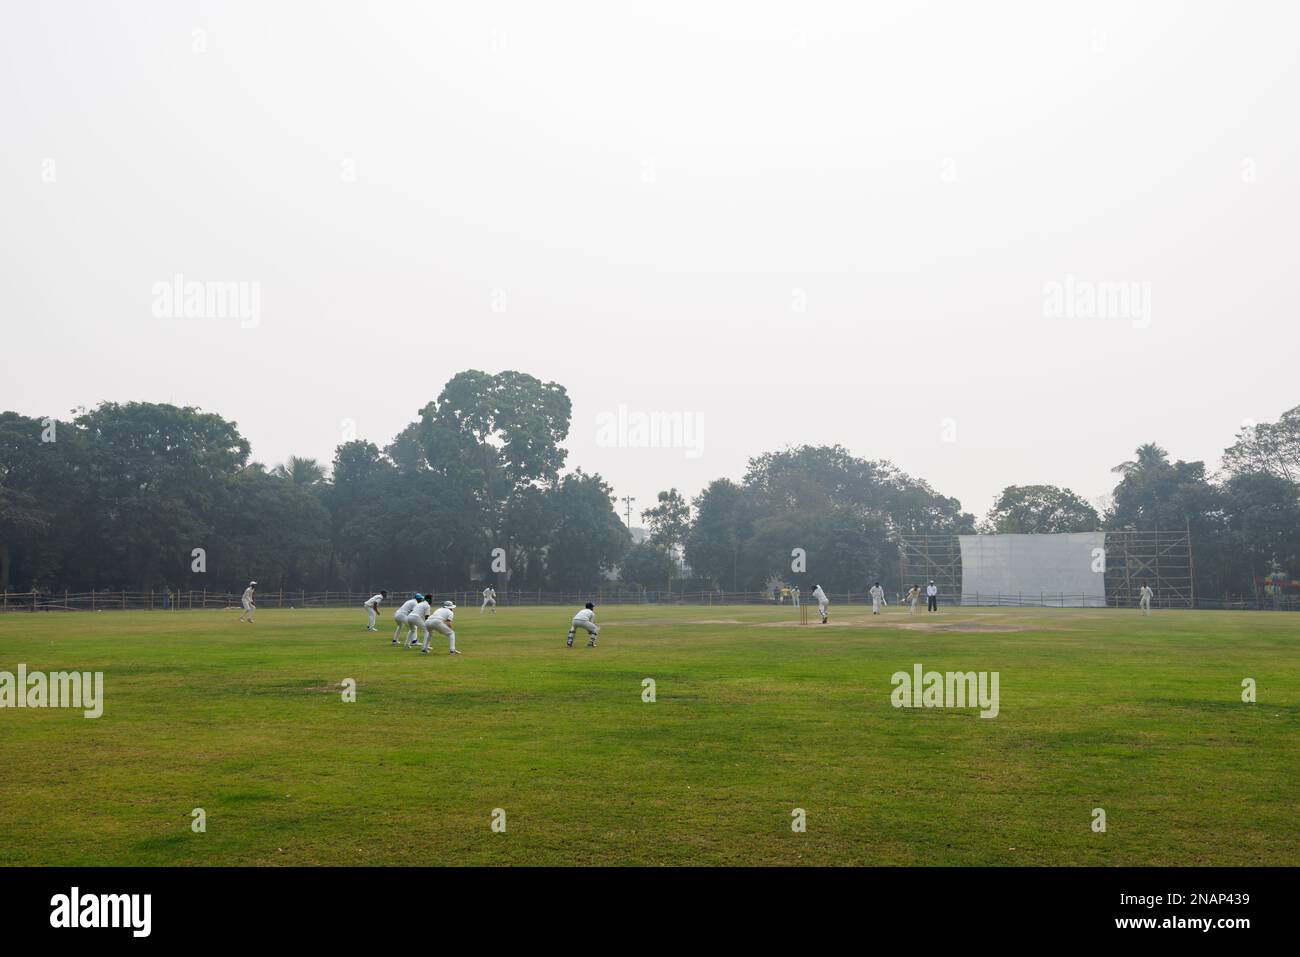 Cricket being played in Deshbandhu Park in Fariapukur, Shyam Bazar, a suburb of Kolkata, West Bengal, India on a smoggy day Stock Photo